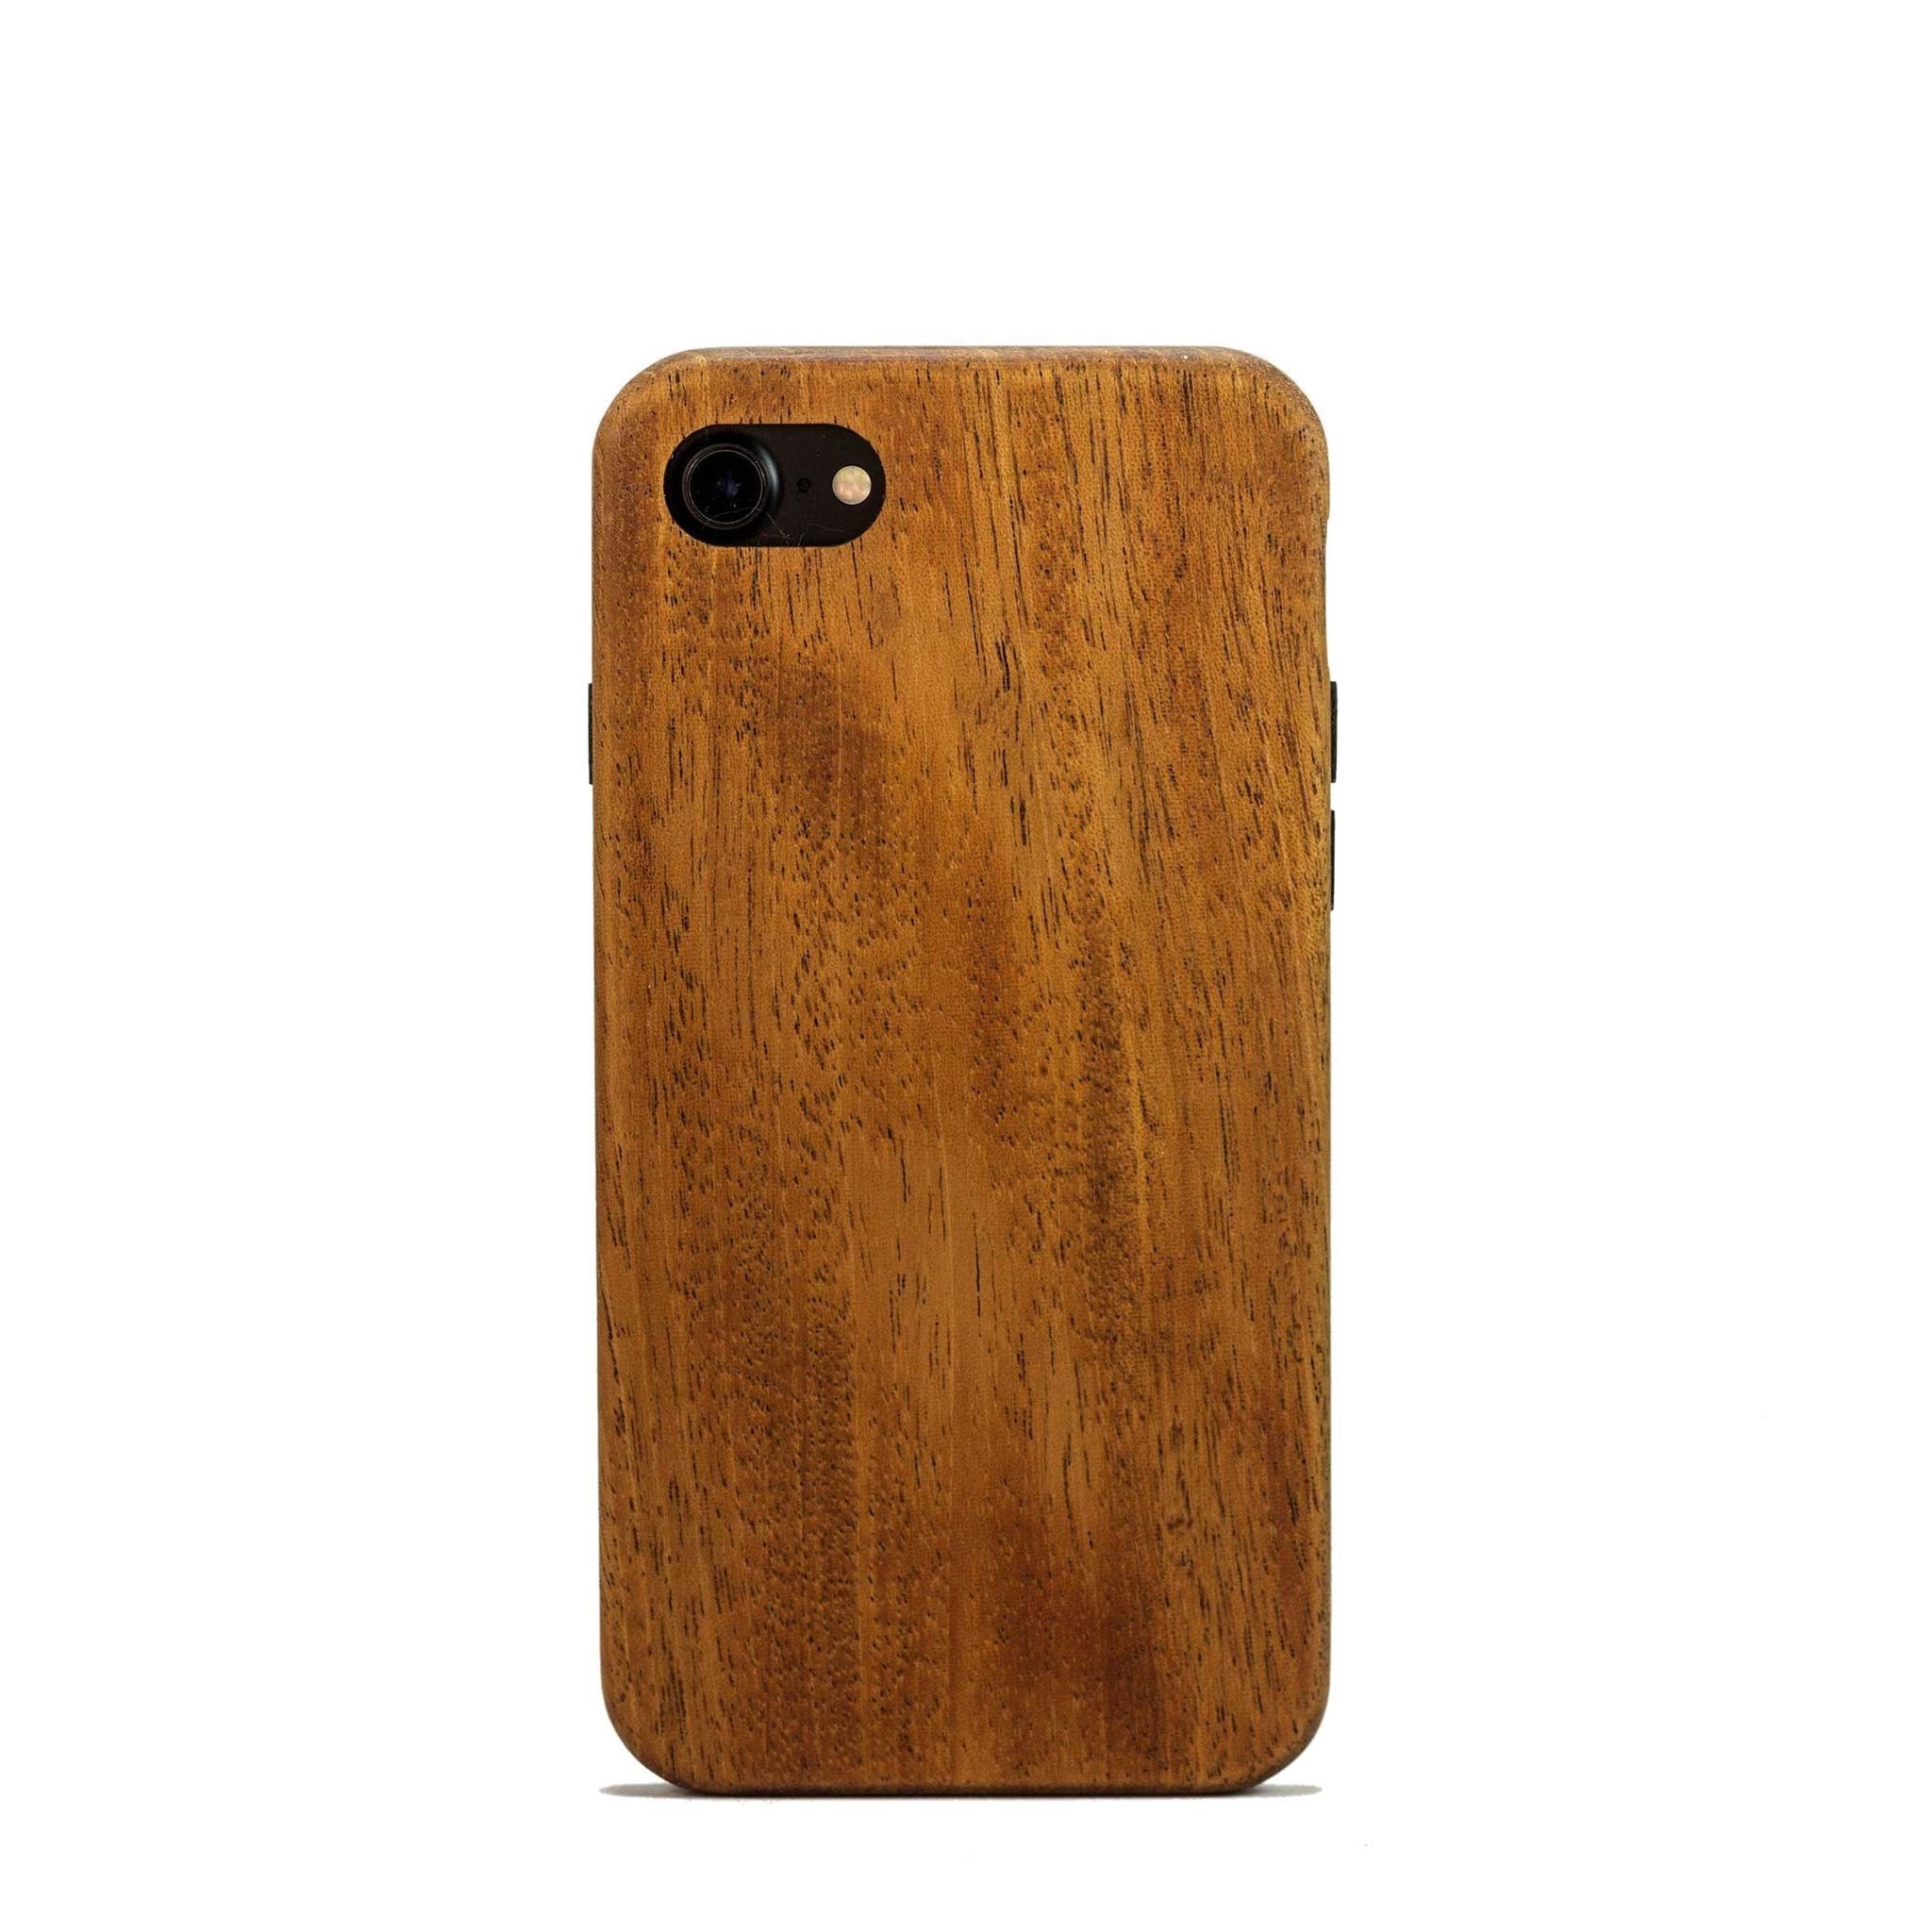 Mahogany Wood Case for iPhone 7